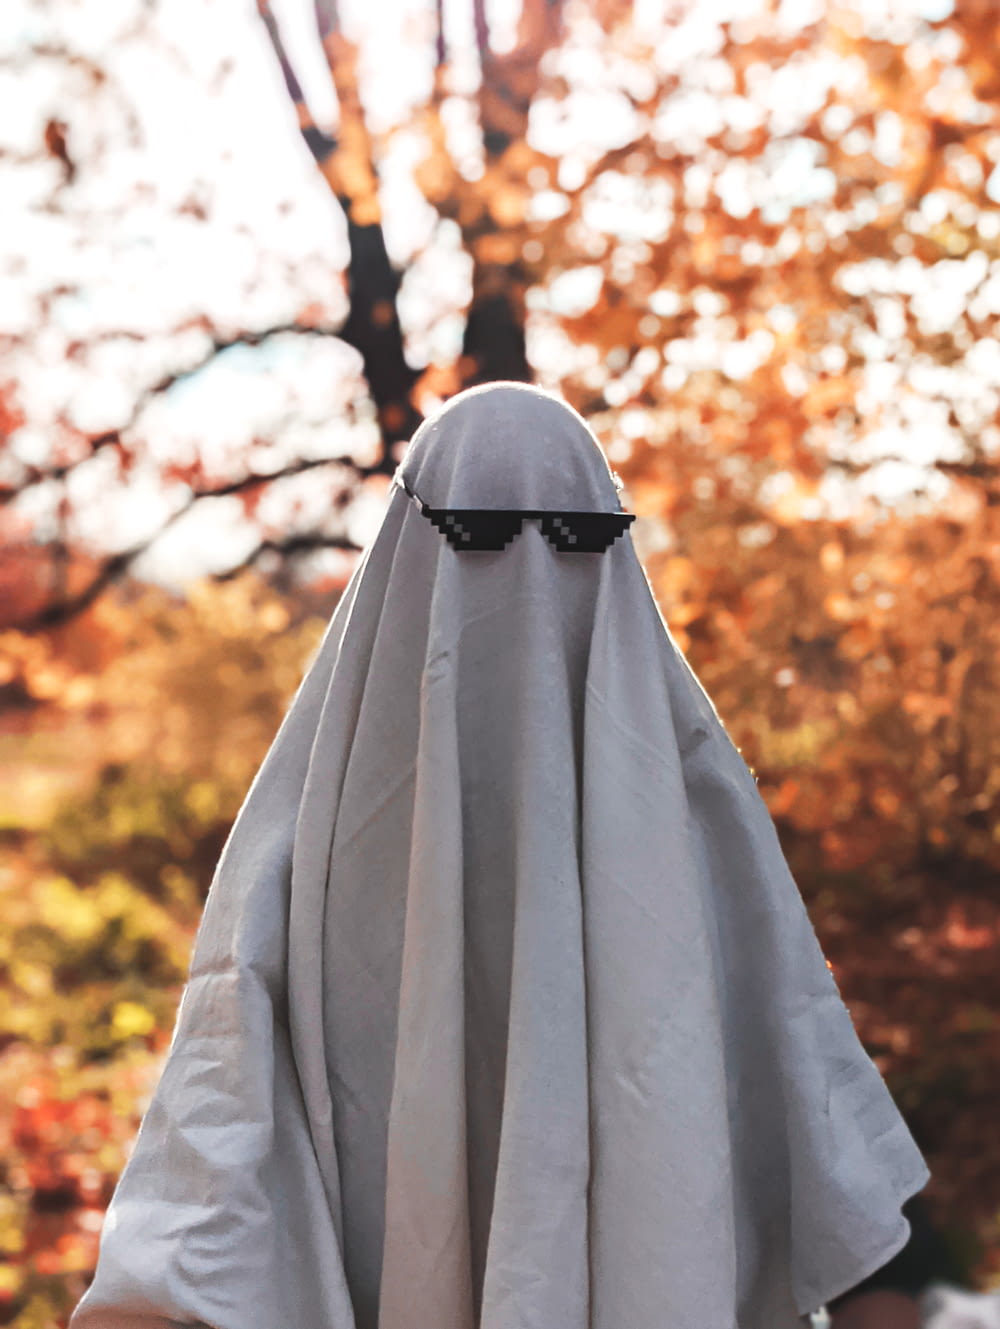 a person wearing a white cloak and sunglasses